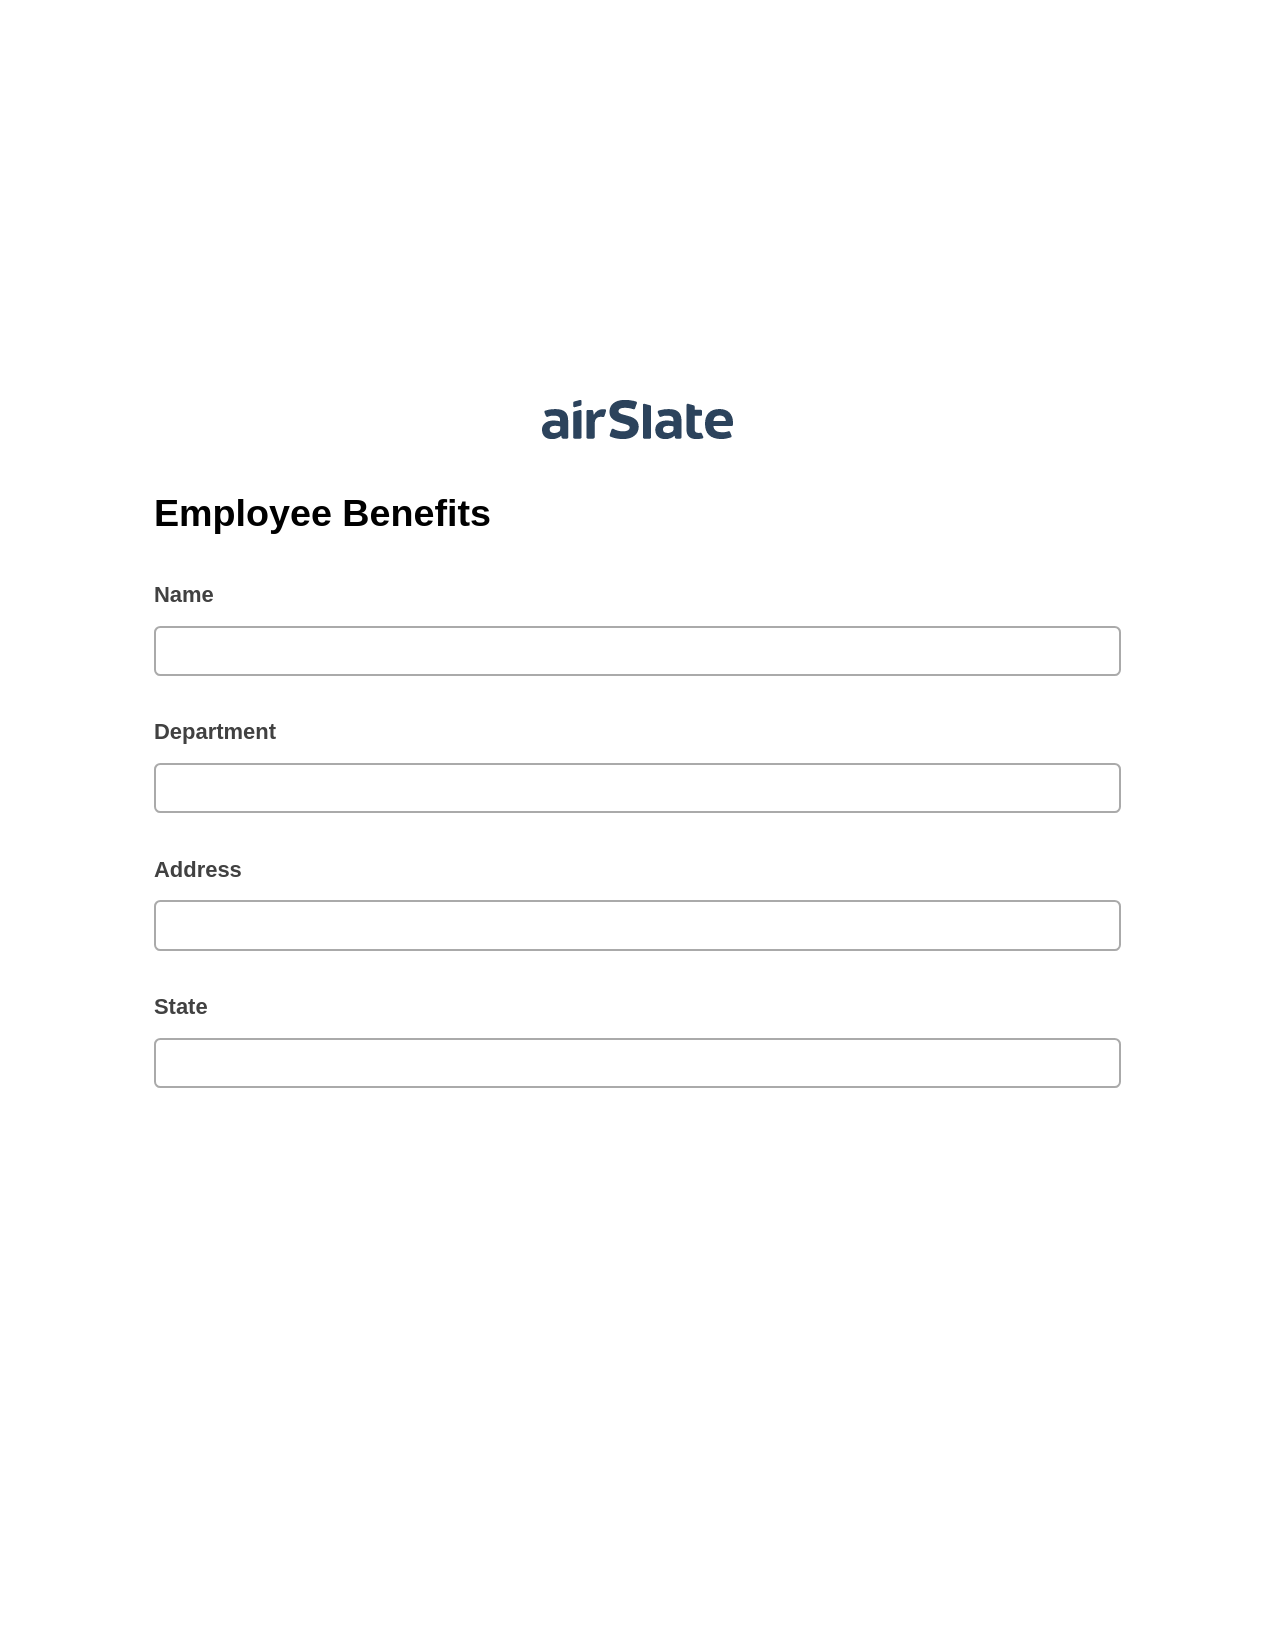 Employee Benefits Pre-fill from CSV File Bot, Send a Slate with Roles Bot, Export to Smartsheet